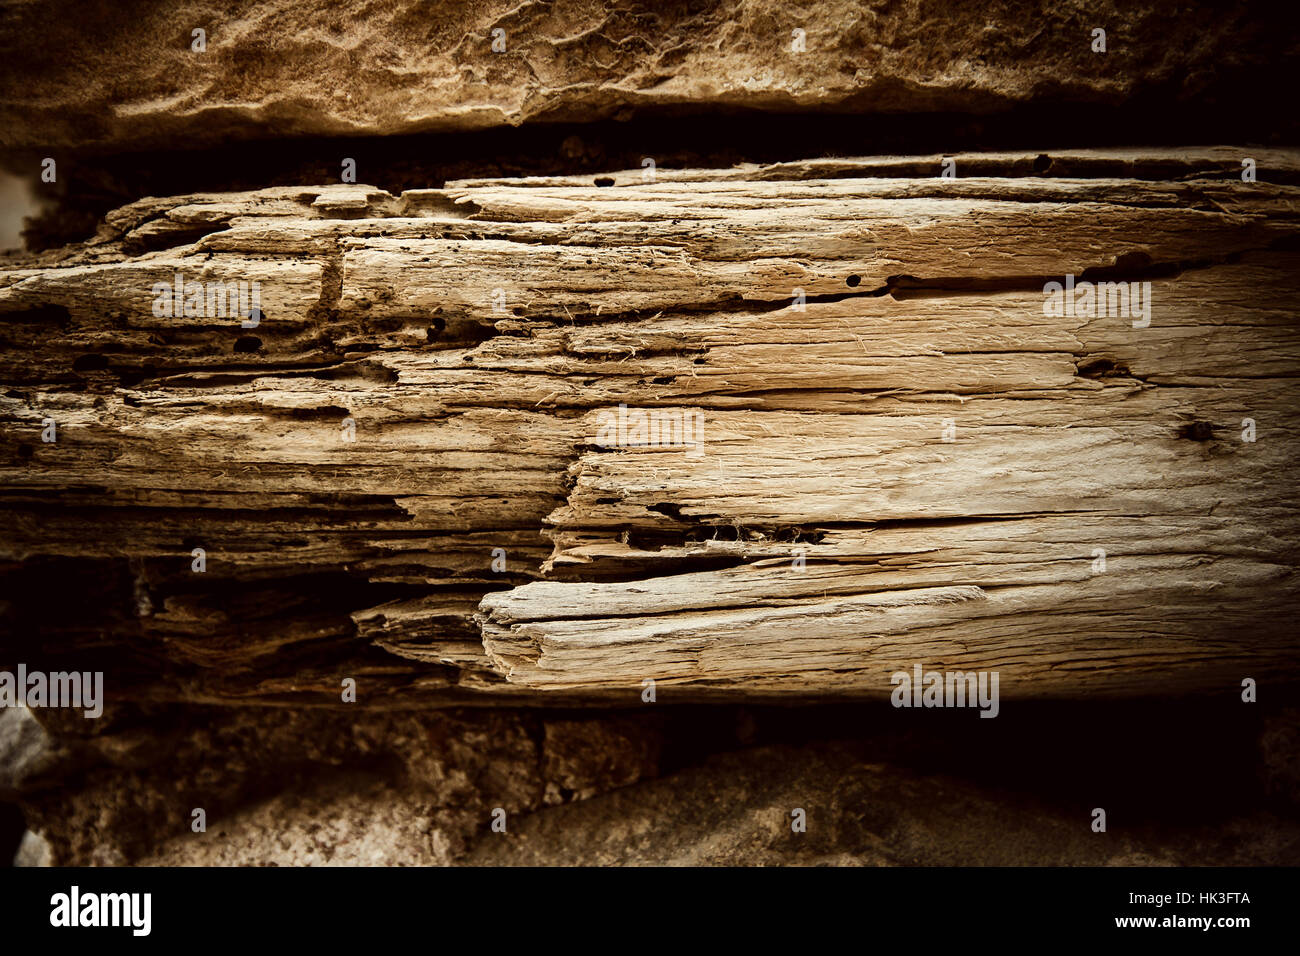 Dry, rotted tree old wood wall, as background Stock Photo